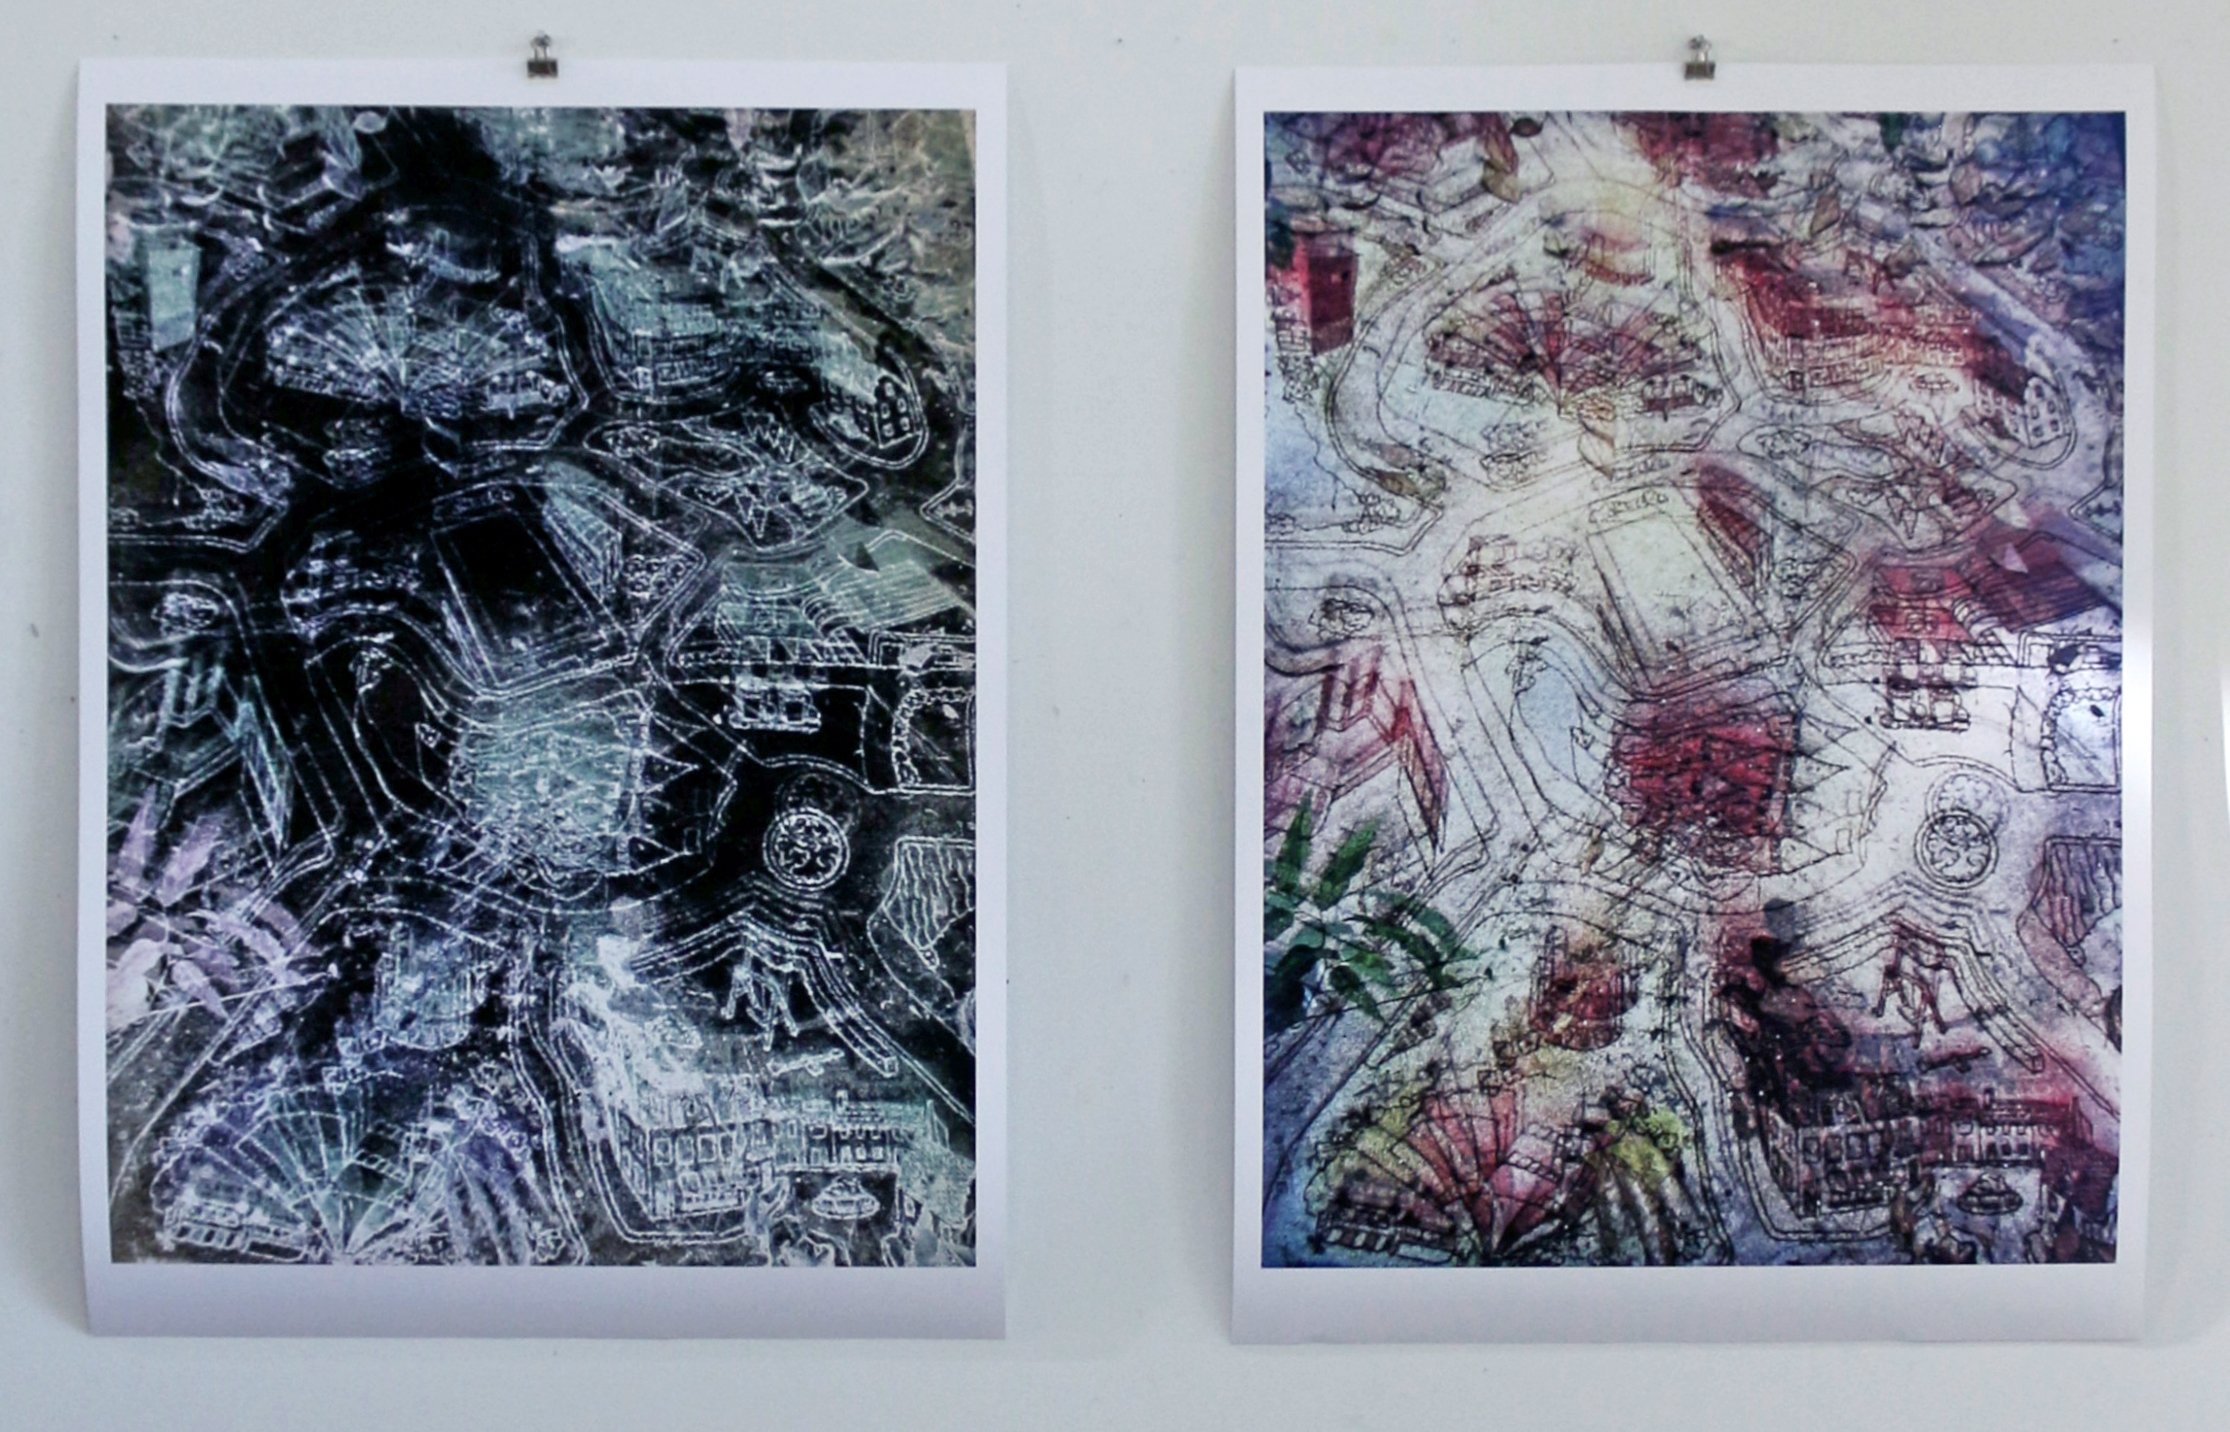  Mrs. Pickering’s magic carpet, 2022, diptych, archival pigment print and wax  